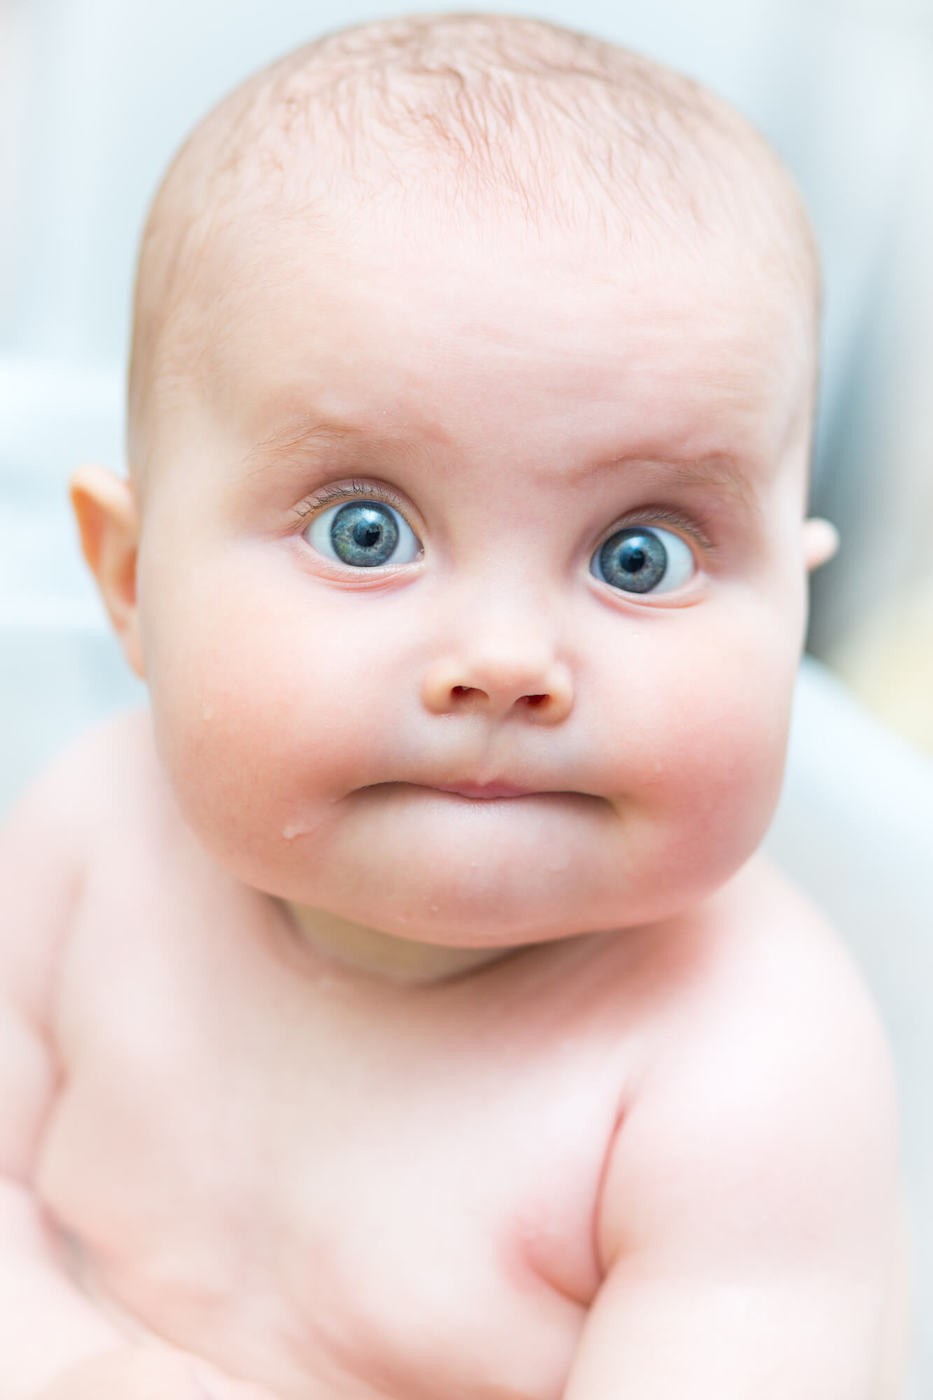 blue-eyed baby staring directly at viewer with some surprise on their face